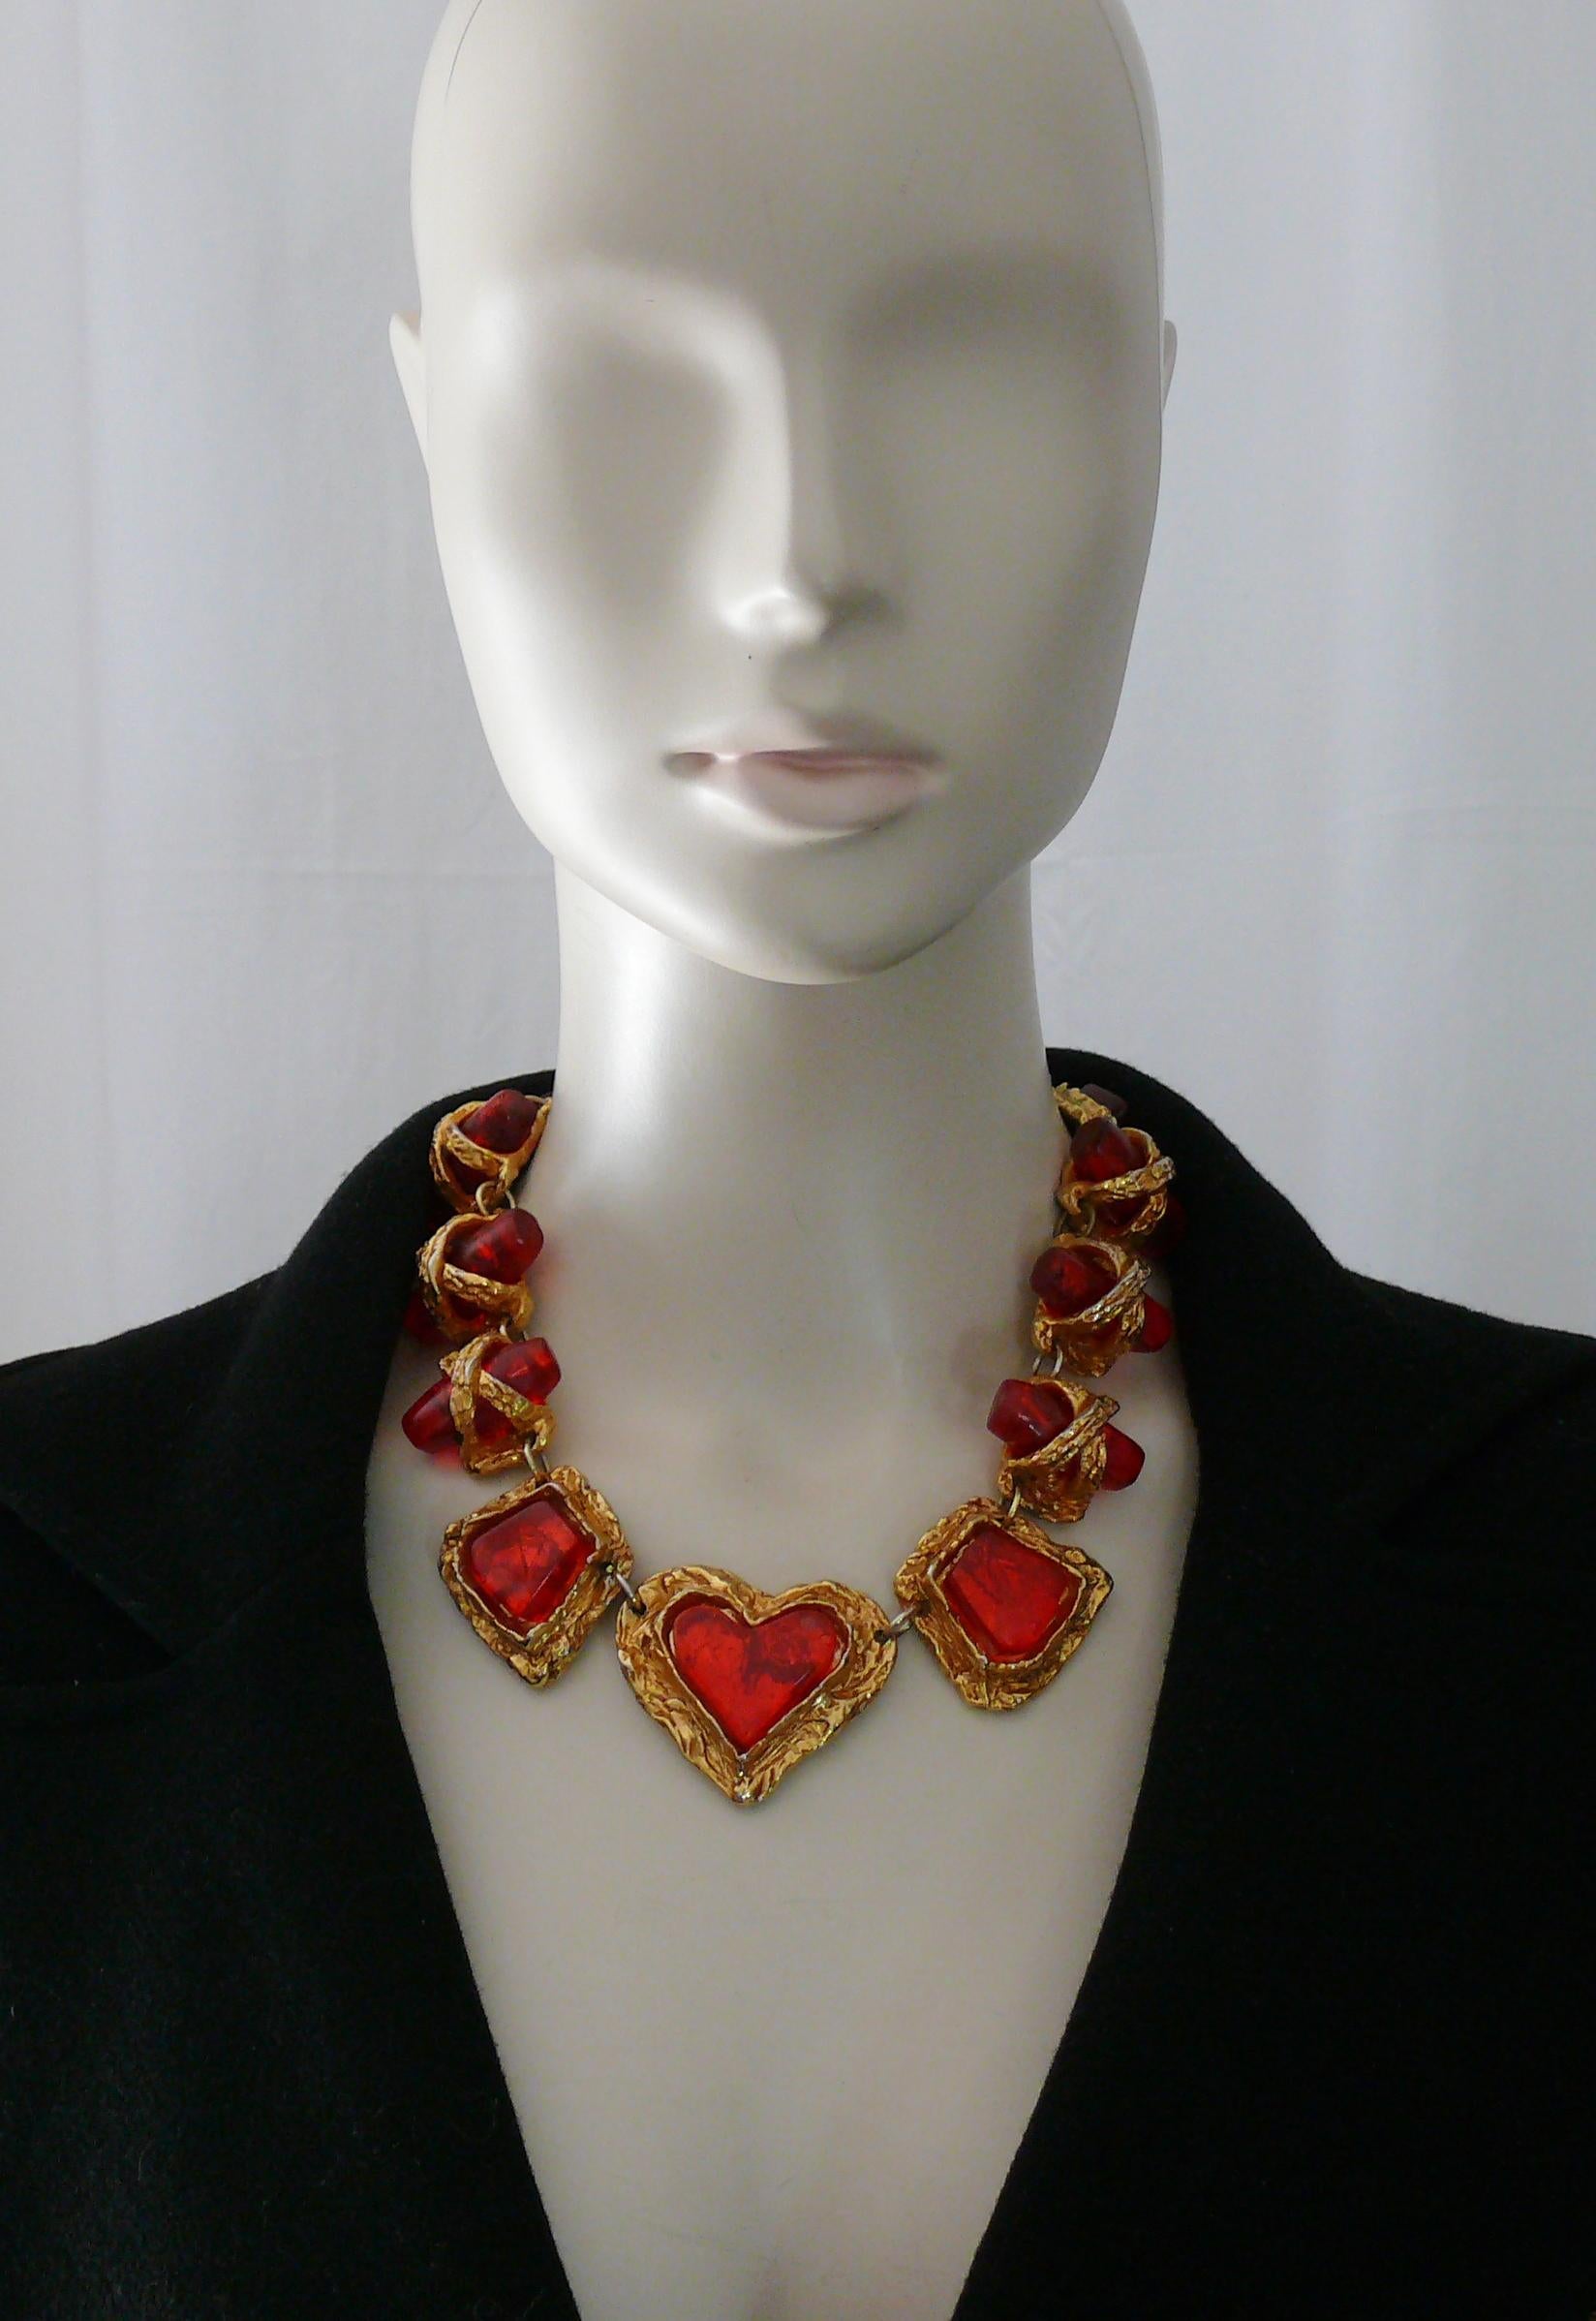 CHRISTIAN LACROIX gorgeous and rare vintage gold toned necklace featuring creased links embellished with red resin cabochons.

T bar and toggle closure.

Marked CHRISTIAN LACROIX CL Made in France.

Indicative measurements : length approx. 45 cm